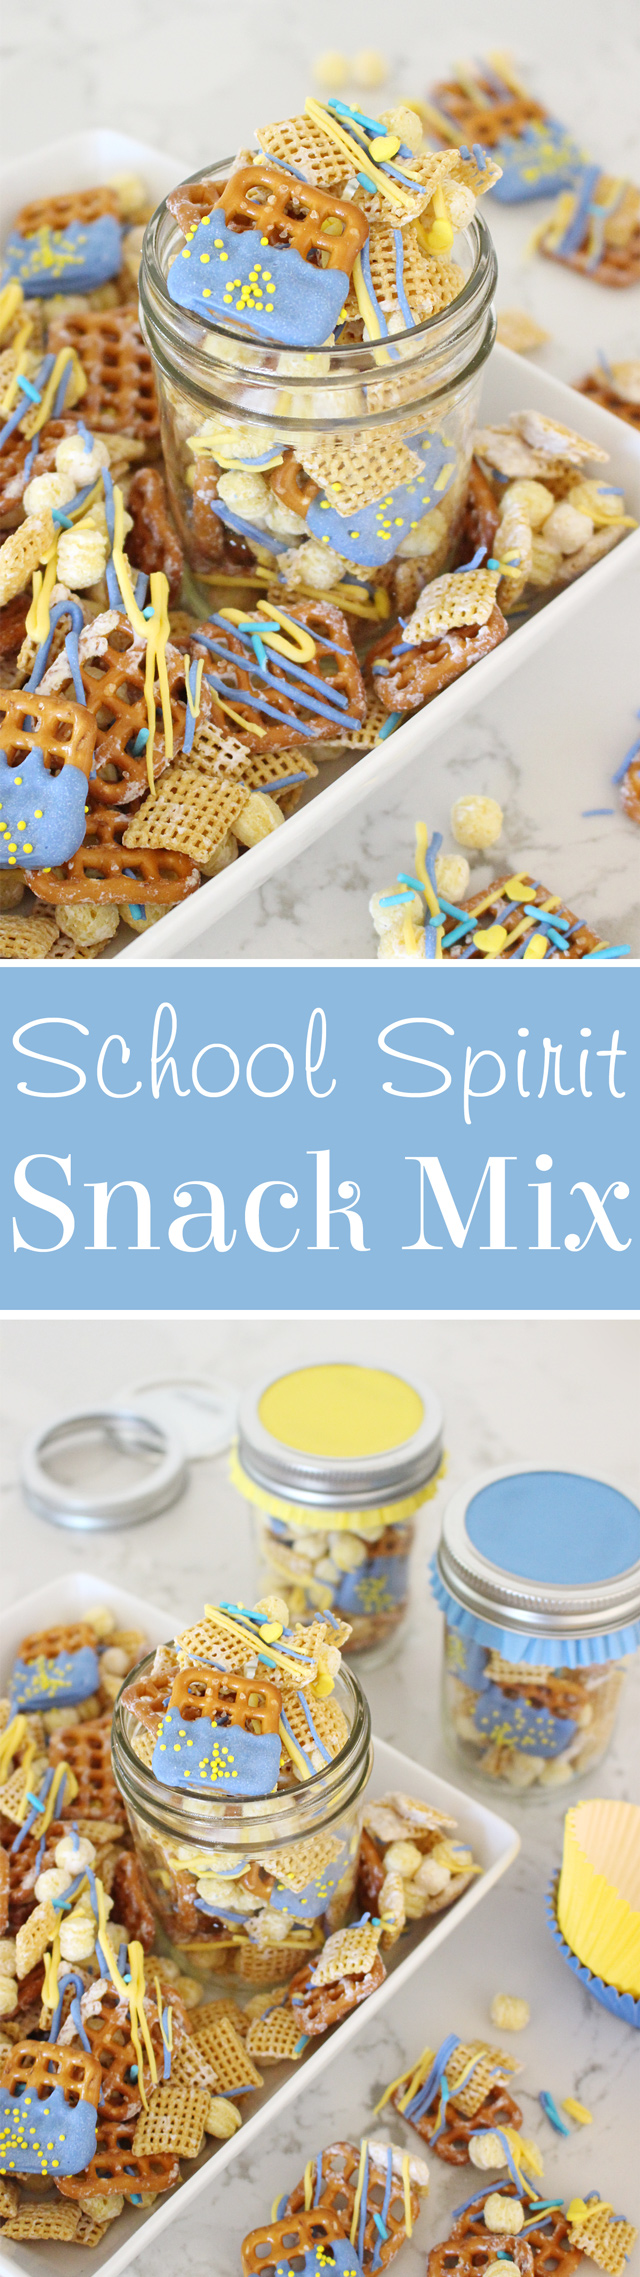 Simple SNACK MIX RECIPE perfect for school events! 